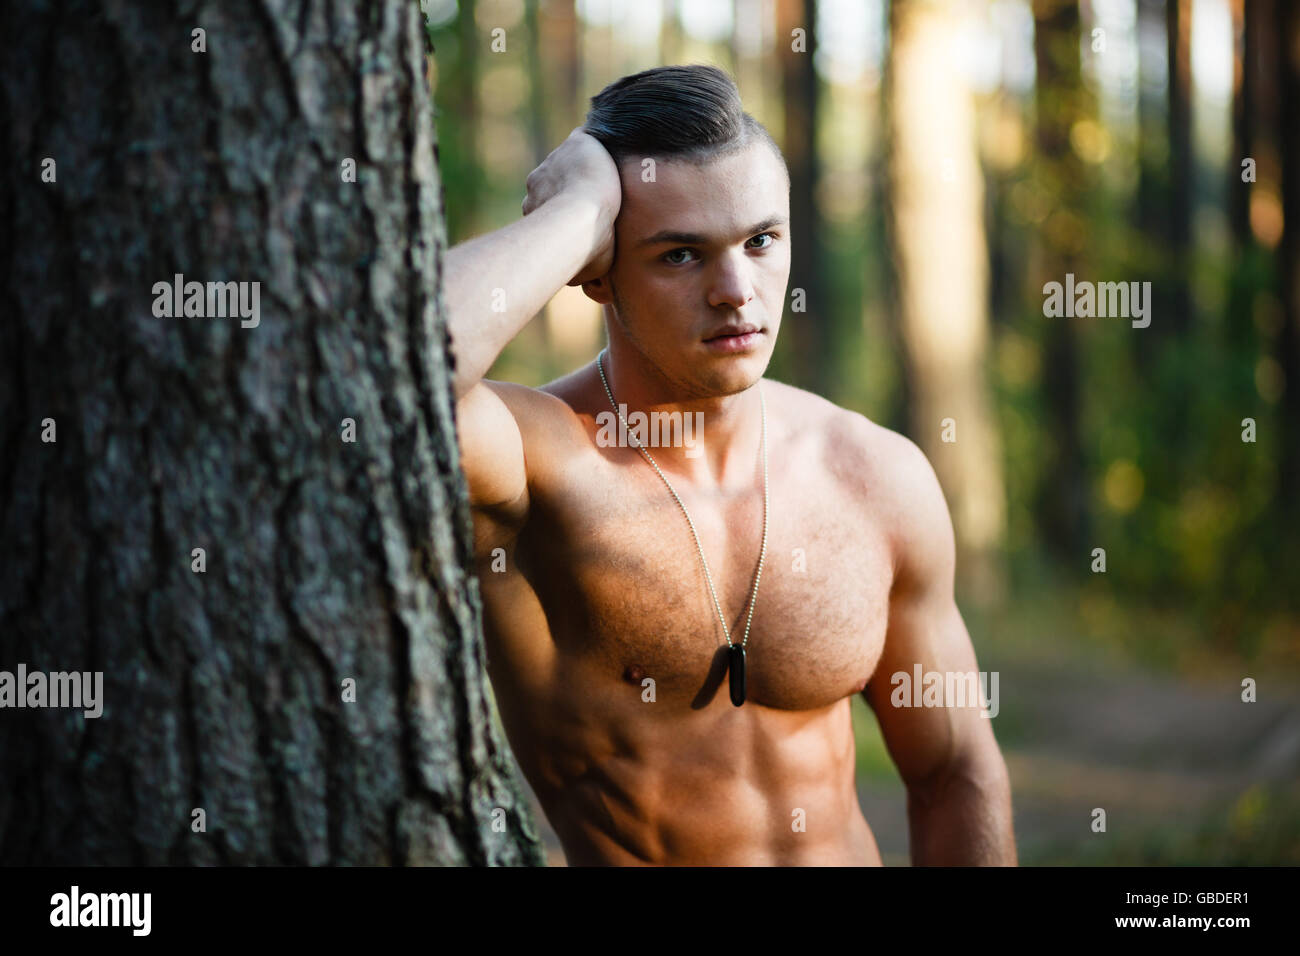 Outdoor portrait of muscular young man Stock Photo